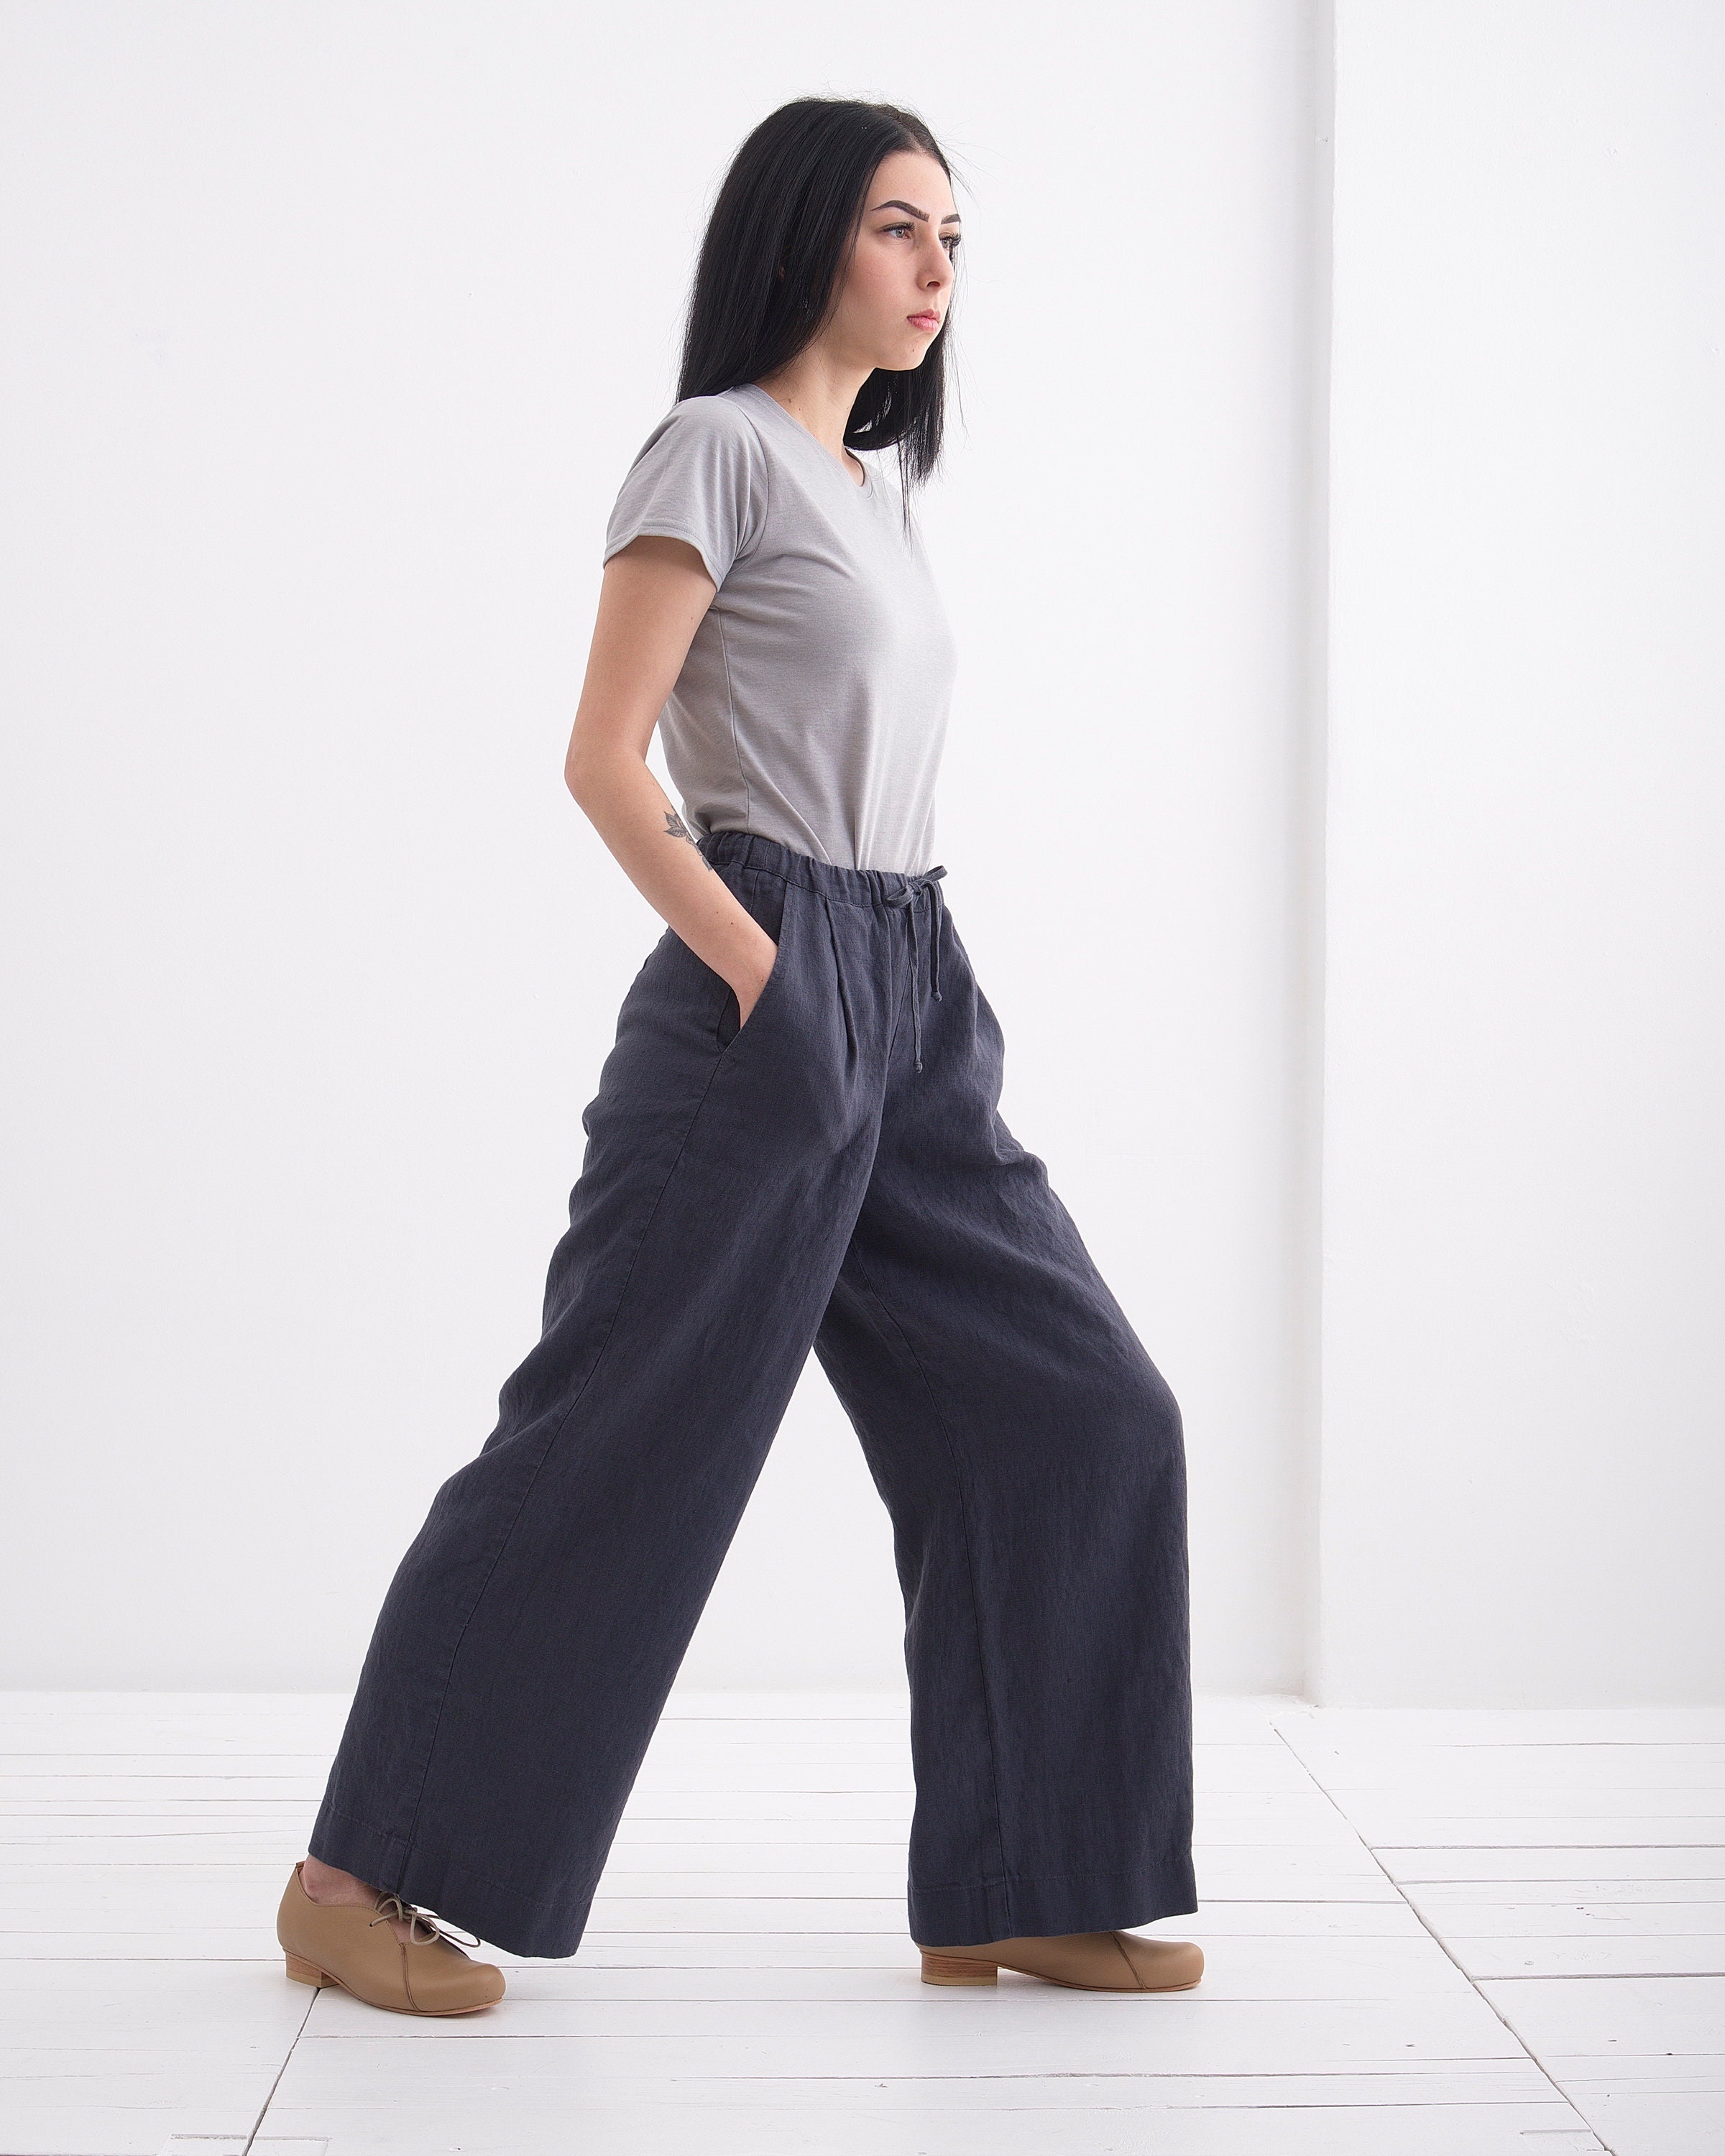 Linen Trousers. Softened, Washed Linen Women's Pants. Elegant, Classic,  Comfortable Trousers With Pockets, Elastic Waist. 